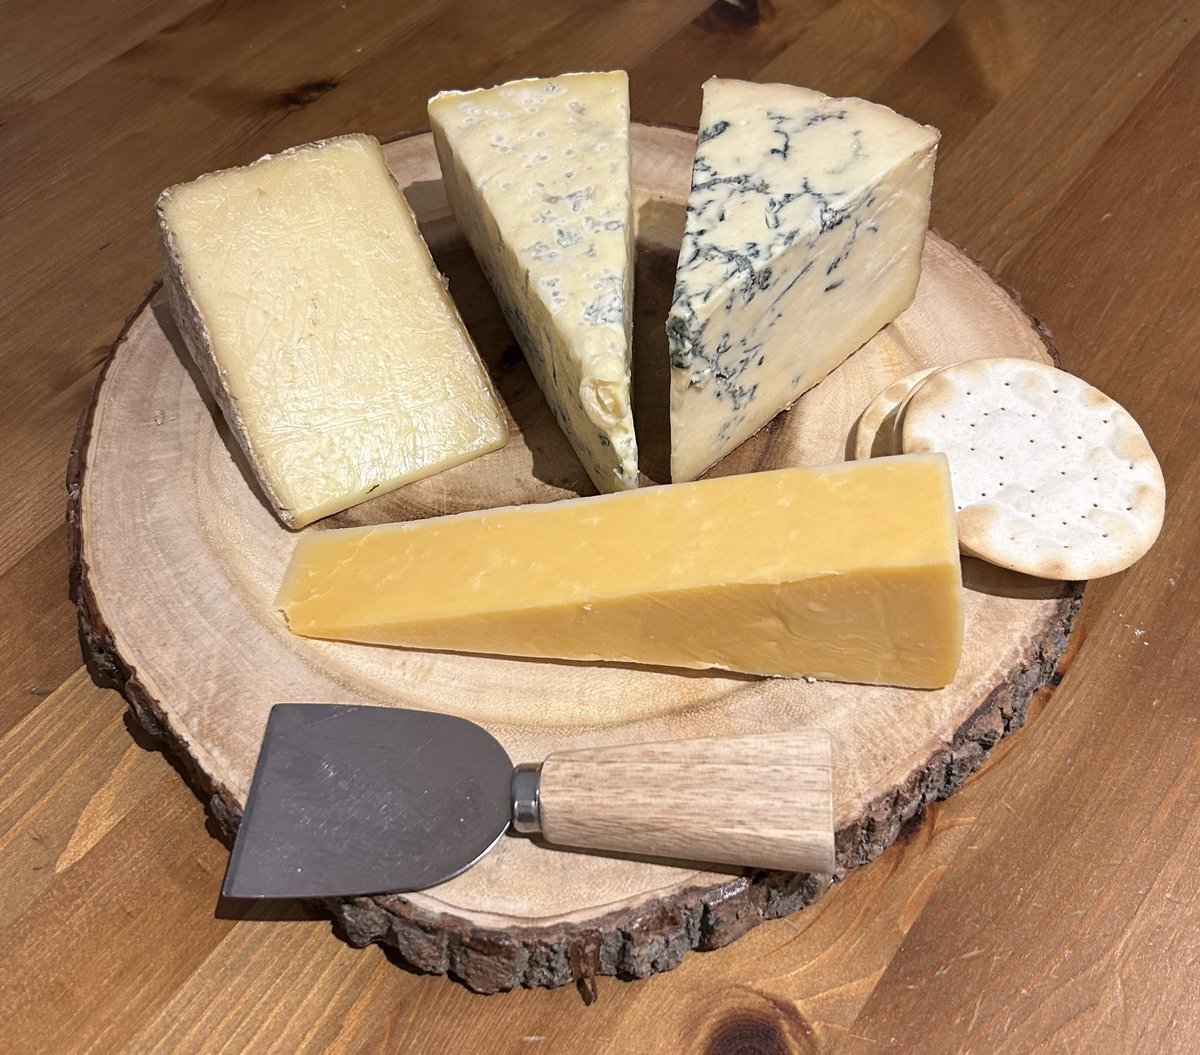 We have Nettlebed Creamery Witheridge in Hay, Cropwell Bishop Beauvale and Stilton, and Beltons Double Gloucester. A board of favourites #SundayCheese